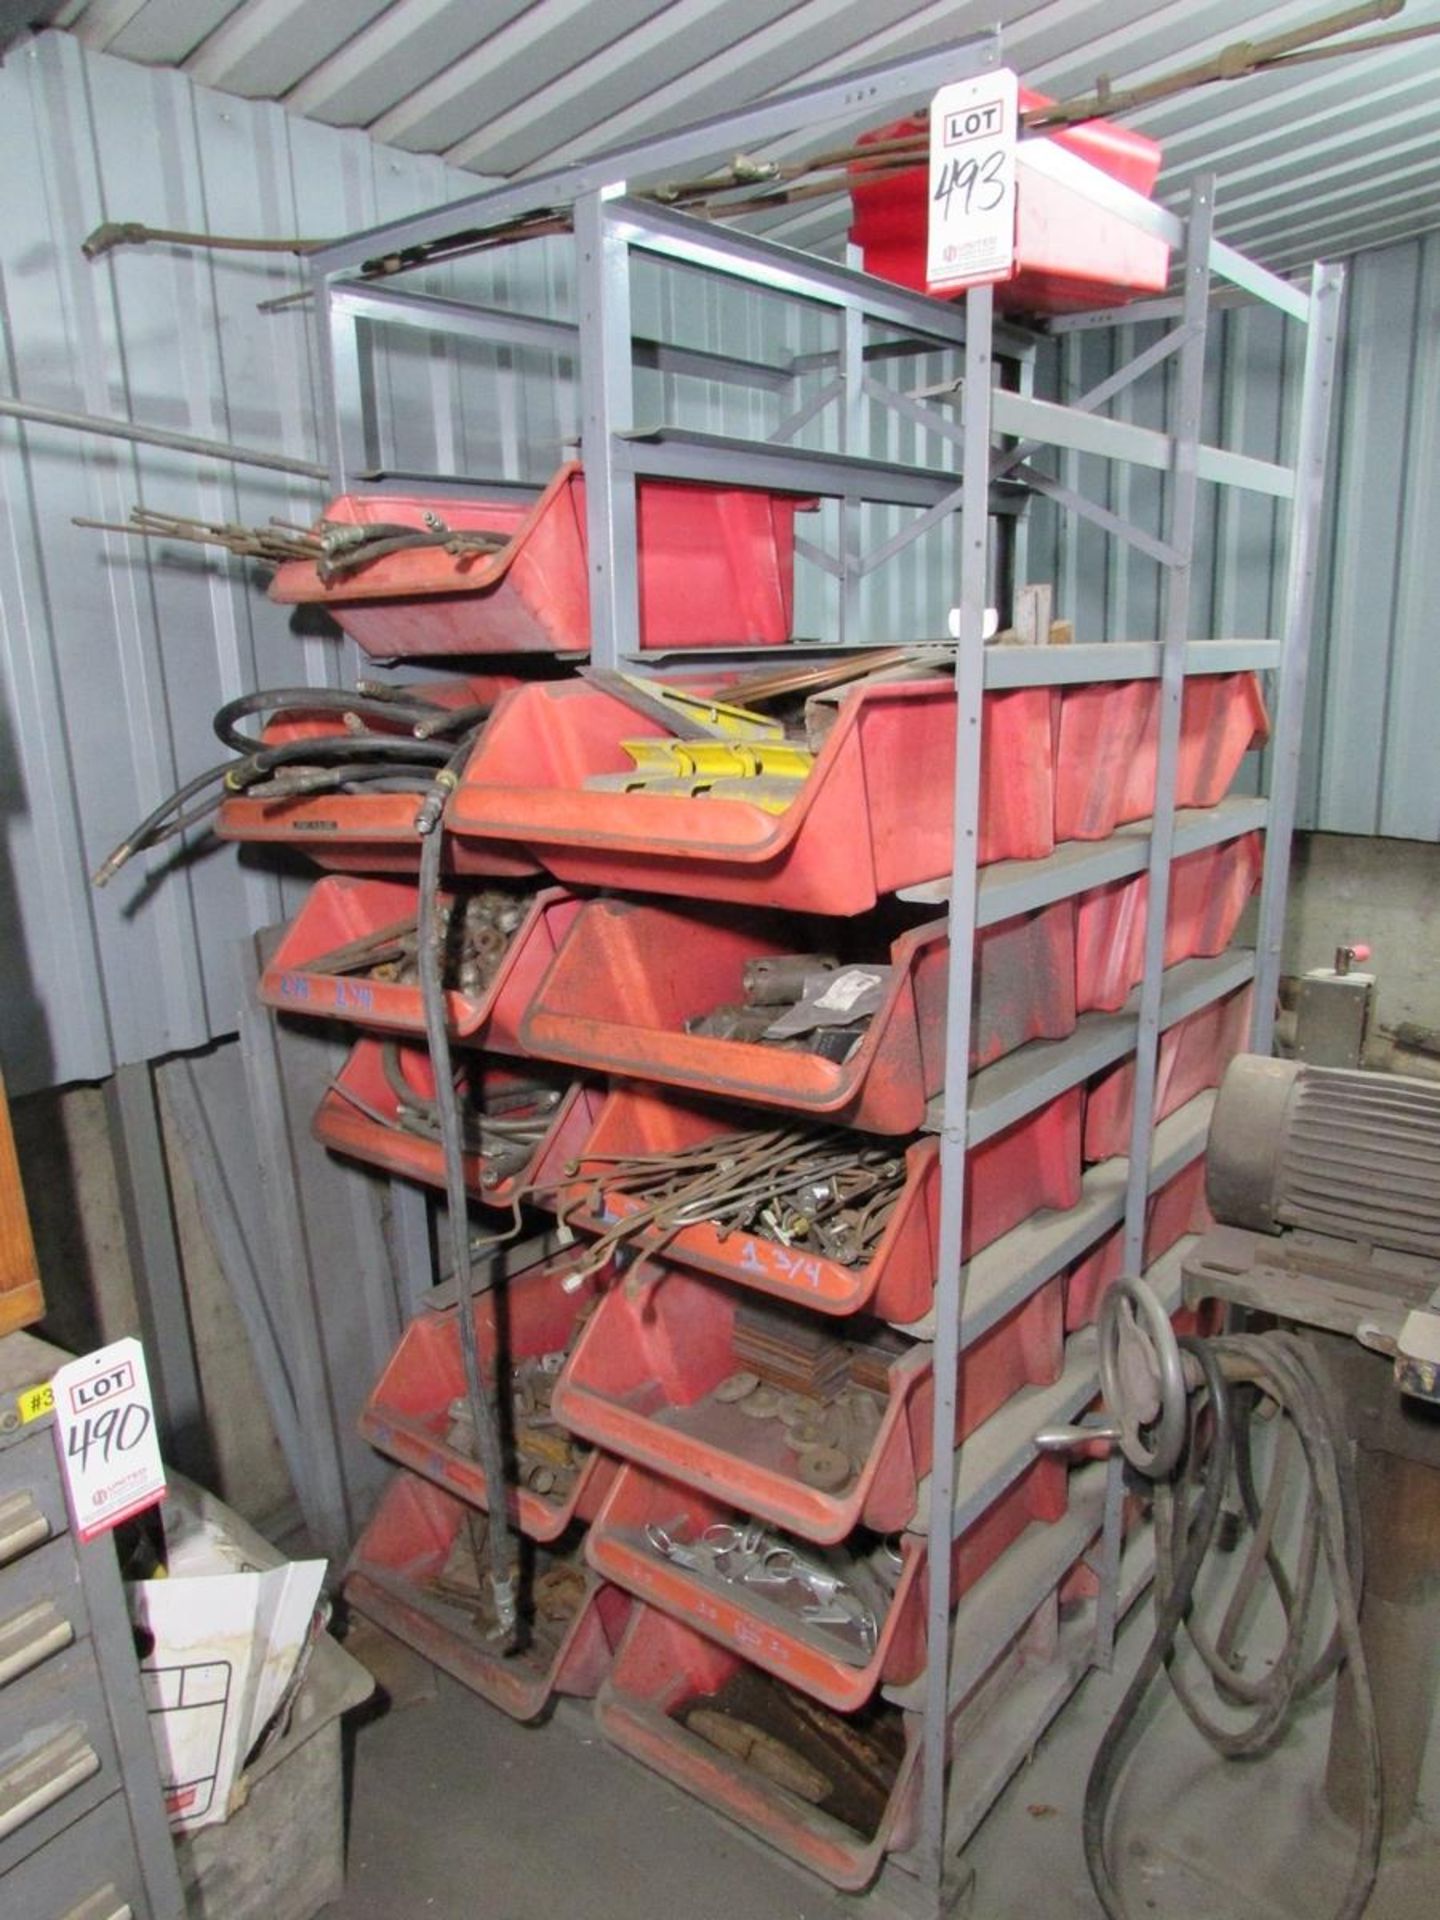 LOT - (10) SHELVING UNITS, W/ MISC. CONTENTS: LARGE ASSORTMENT OF HARDWARE, NUTS, BOLTS, FITTINGS, - Image 13 of 17